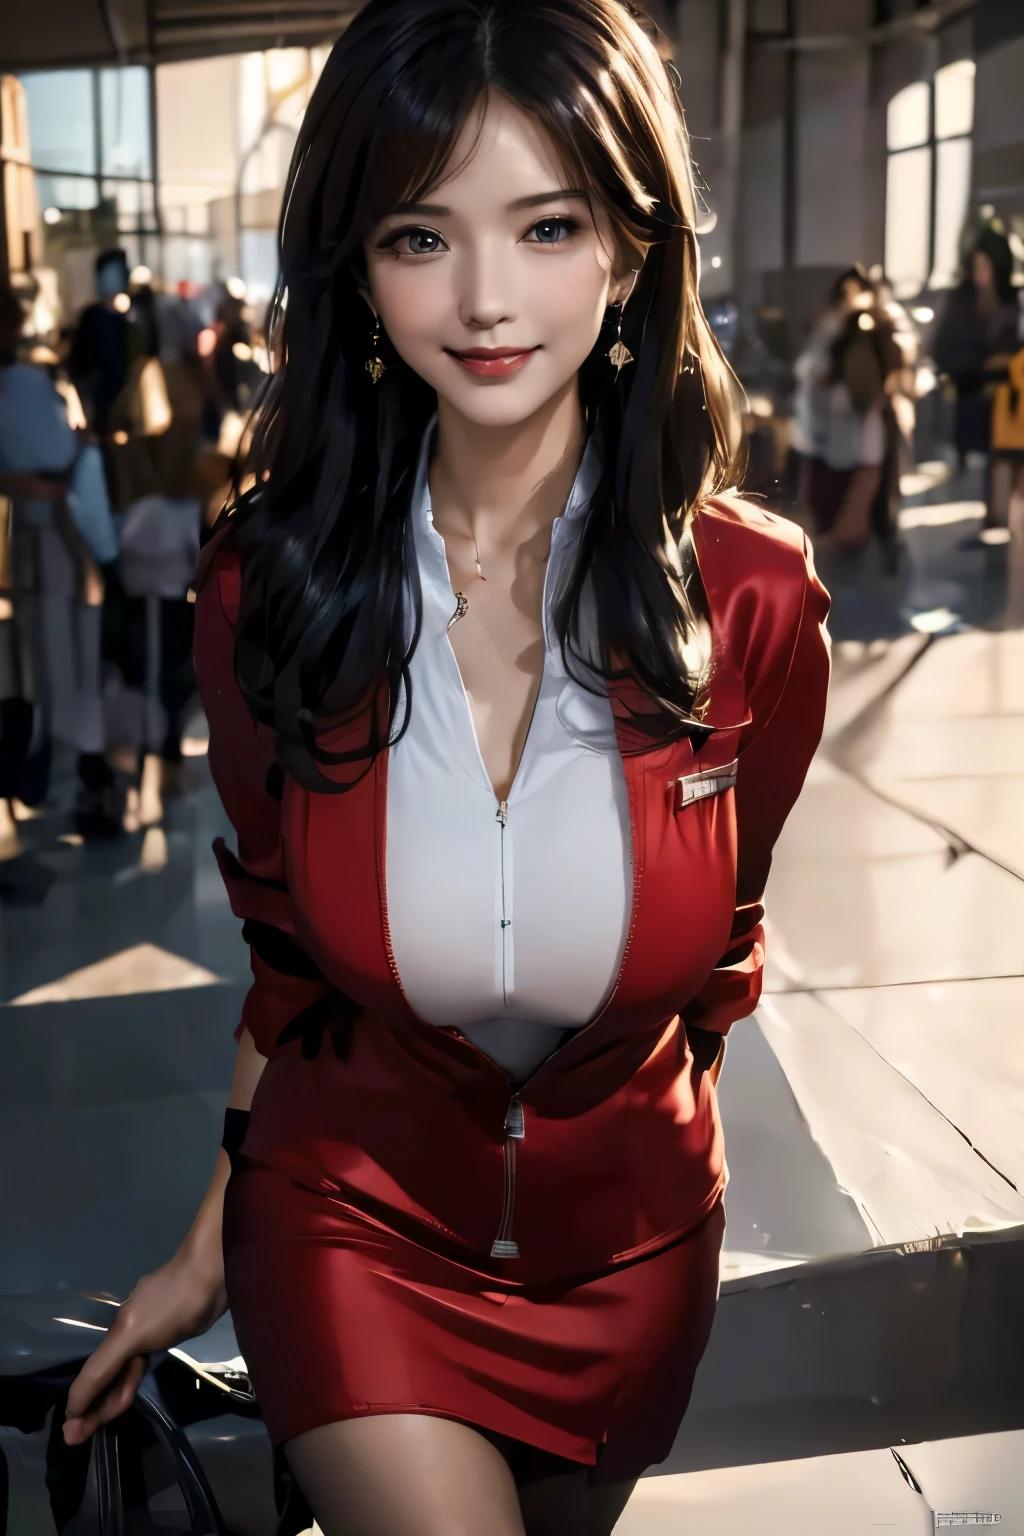 (masterpiece:1.2, highest quality:1.2), 32k HDR, High resolution, (alone, 1 girl), （Ultra-realistic portrait of an AirAsia stewardess in uniform）, neat woman, beautiful face, dark brown hair, (long hair down to waist), (red jacket:1.1, Unzipped jacket, unbuttoned white shirt:1.05, red mini skirt:1.1, pantyhose), perfect slim body:1.1, huge breasts, huge breasts cleavage, detailed skin texture, fine eyes, (smile:1.2), necklace、earrings、(In the airport lounge, bright lighting),blue eyes、long shot